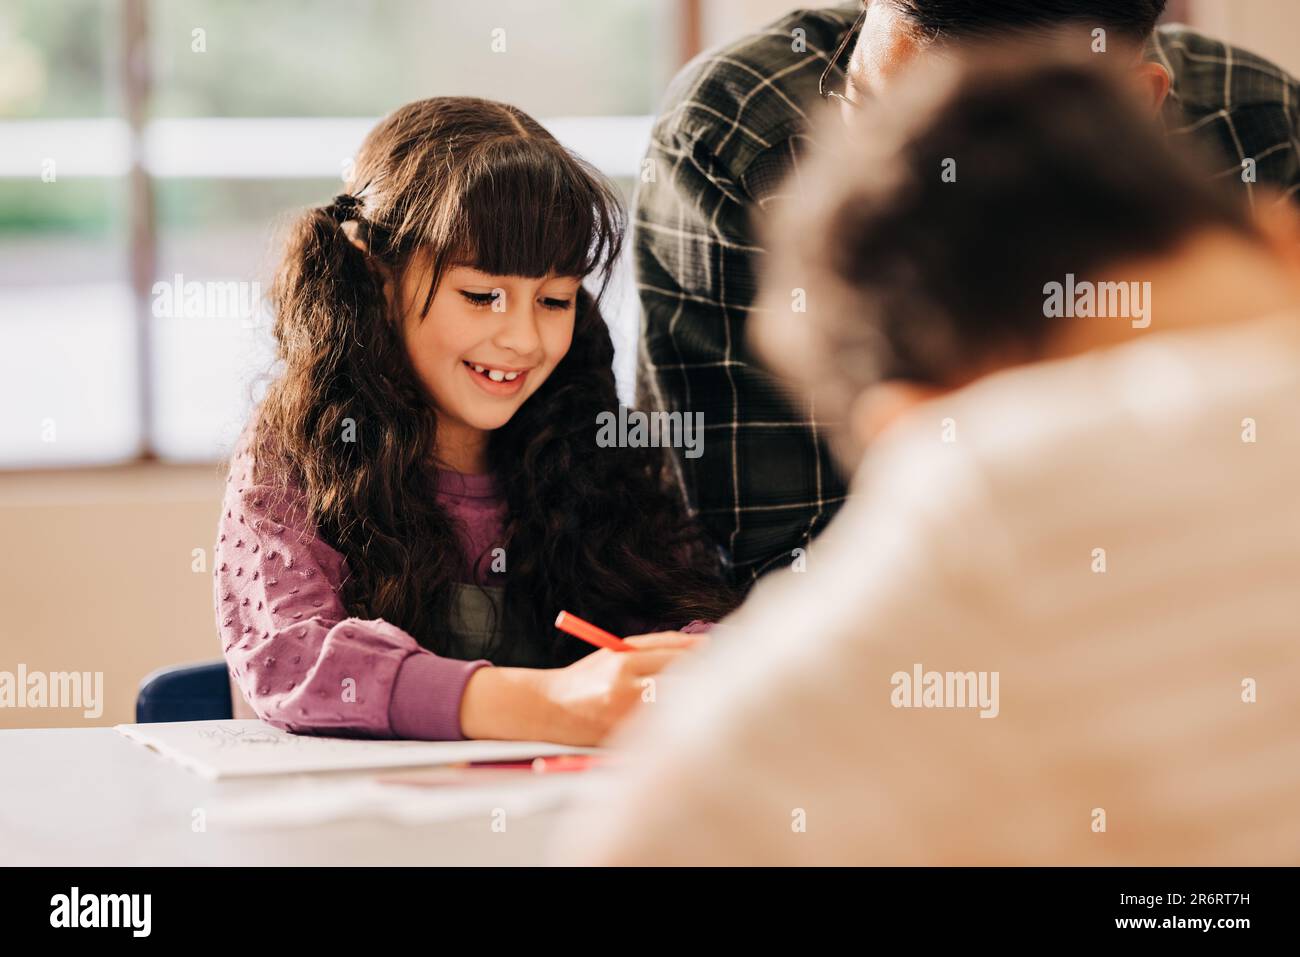 Happy child enjoys being part of a literacy class in elementary school. education, child mentorship and development. Stock Photo